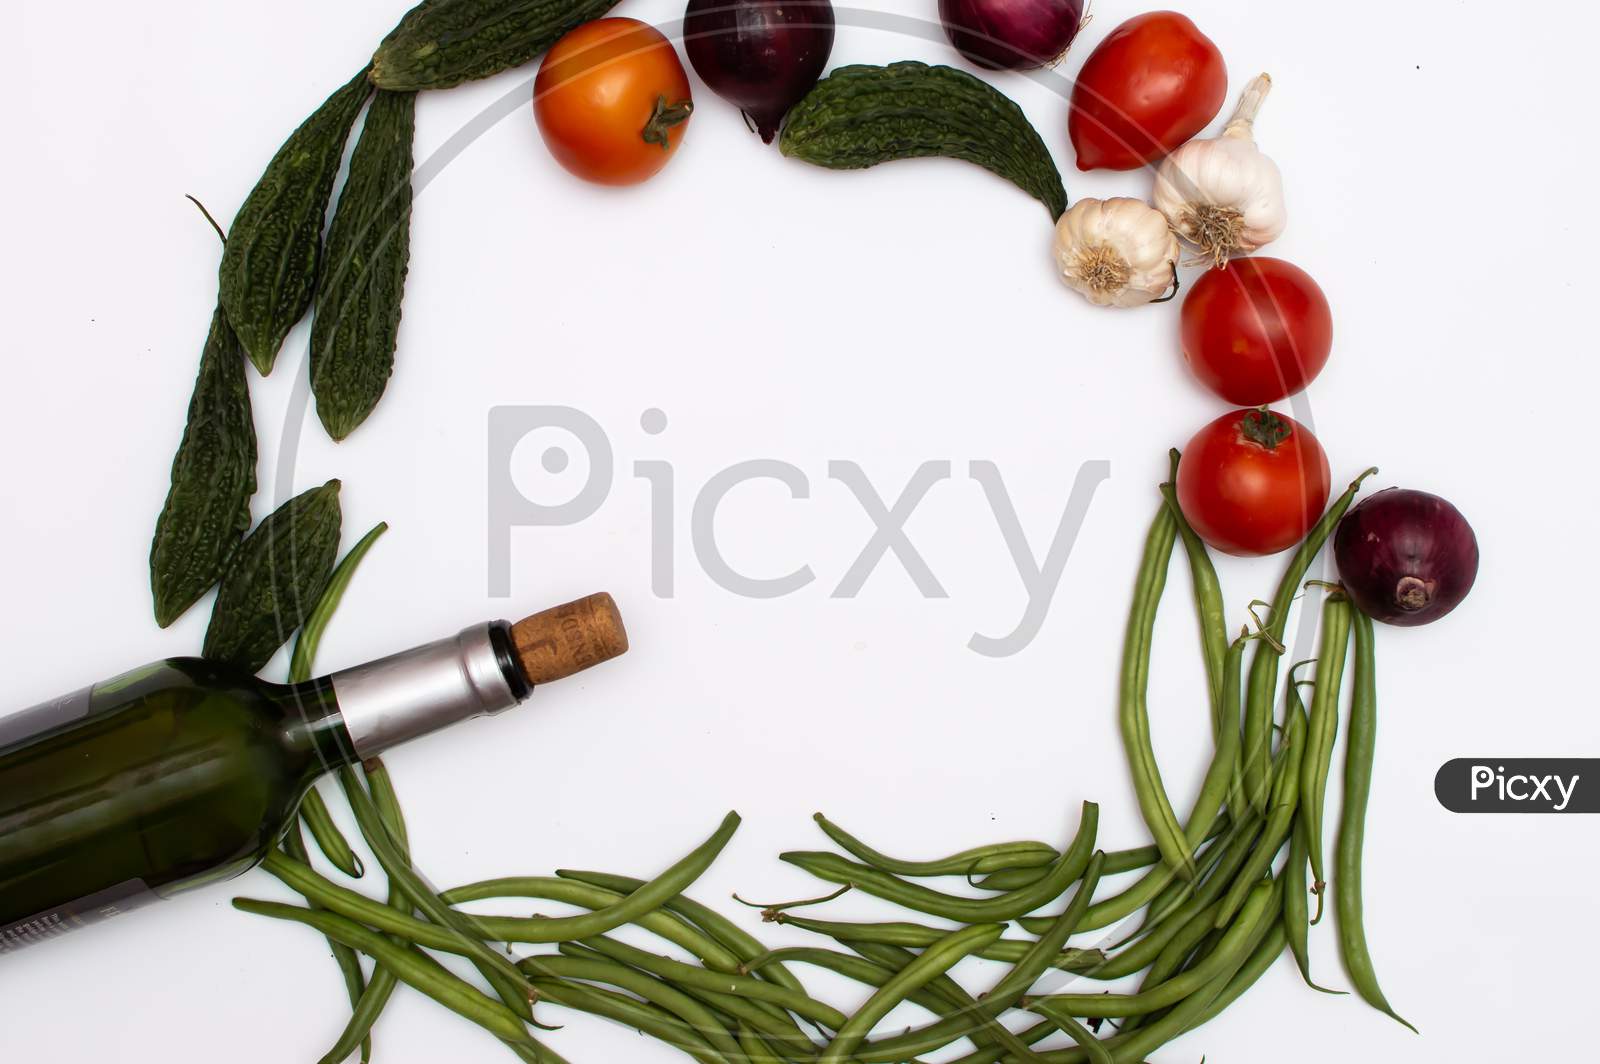 vegetables, fruits and wine placed on a white background